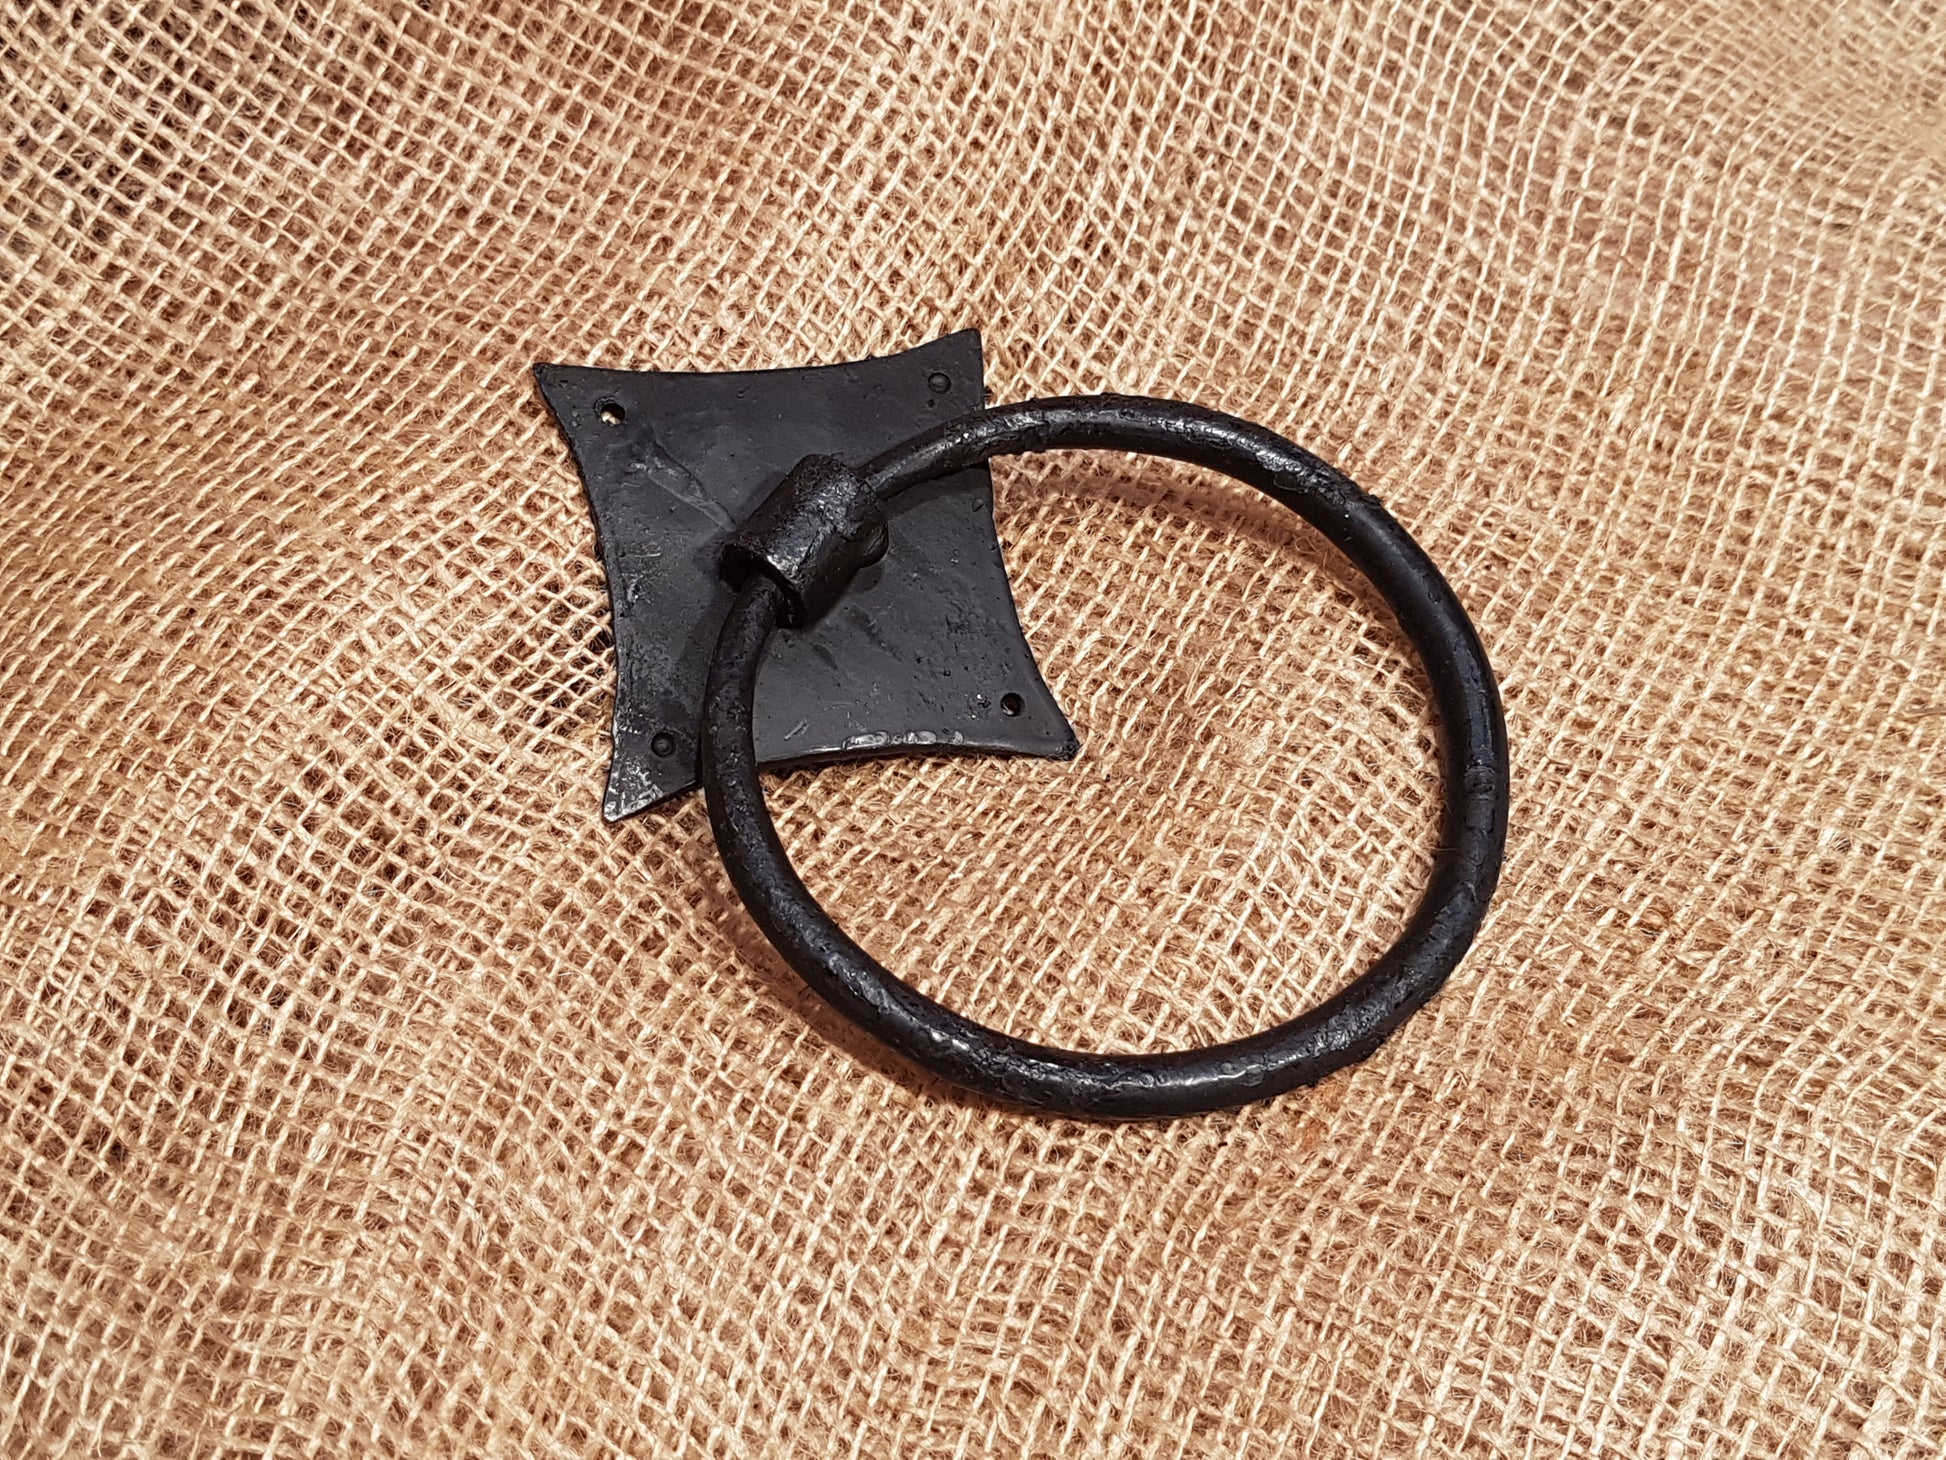 Towel Ring - Black Beeswax 5" Cast Iron - Spearhead Collection - Rails & Rings - Bathroom Decor, Country Farmhouse, Hardware, Home Decor, Interior Decor, Rails Rings & Eye Loops, Towel Holder